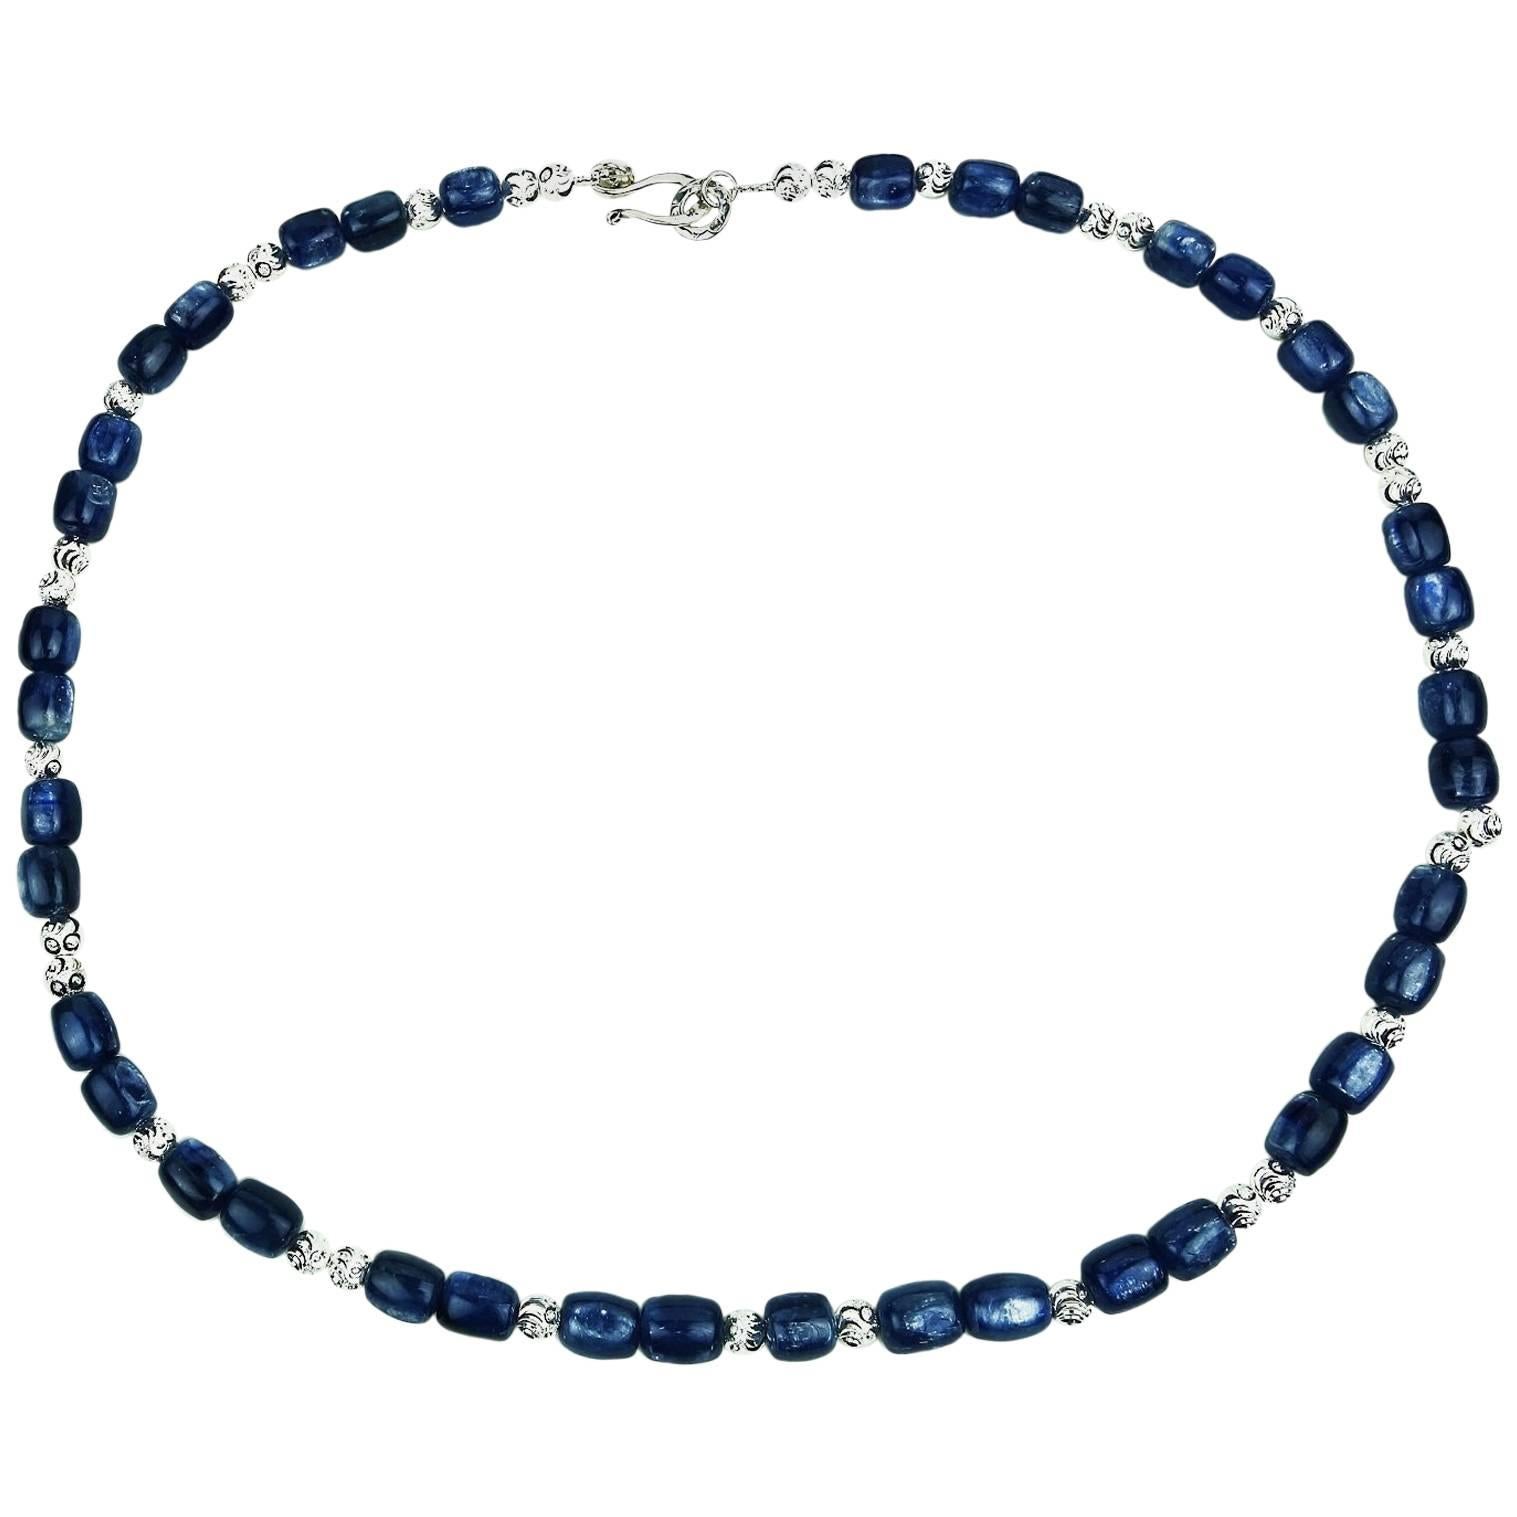 Lovely Blue Kyanite and detailed silver tone spacers create a statement necklace that goes from evenings out to daytime jeans and tee. This is a great color that enhances whatever you choose to pair it with.  The 24.5 inch length is very versatile